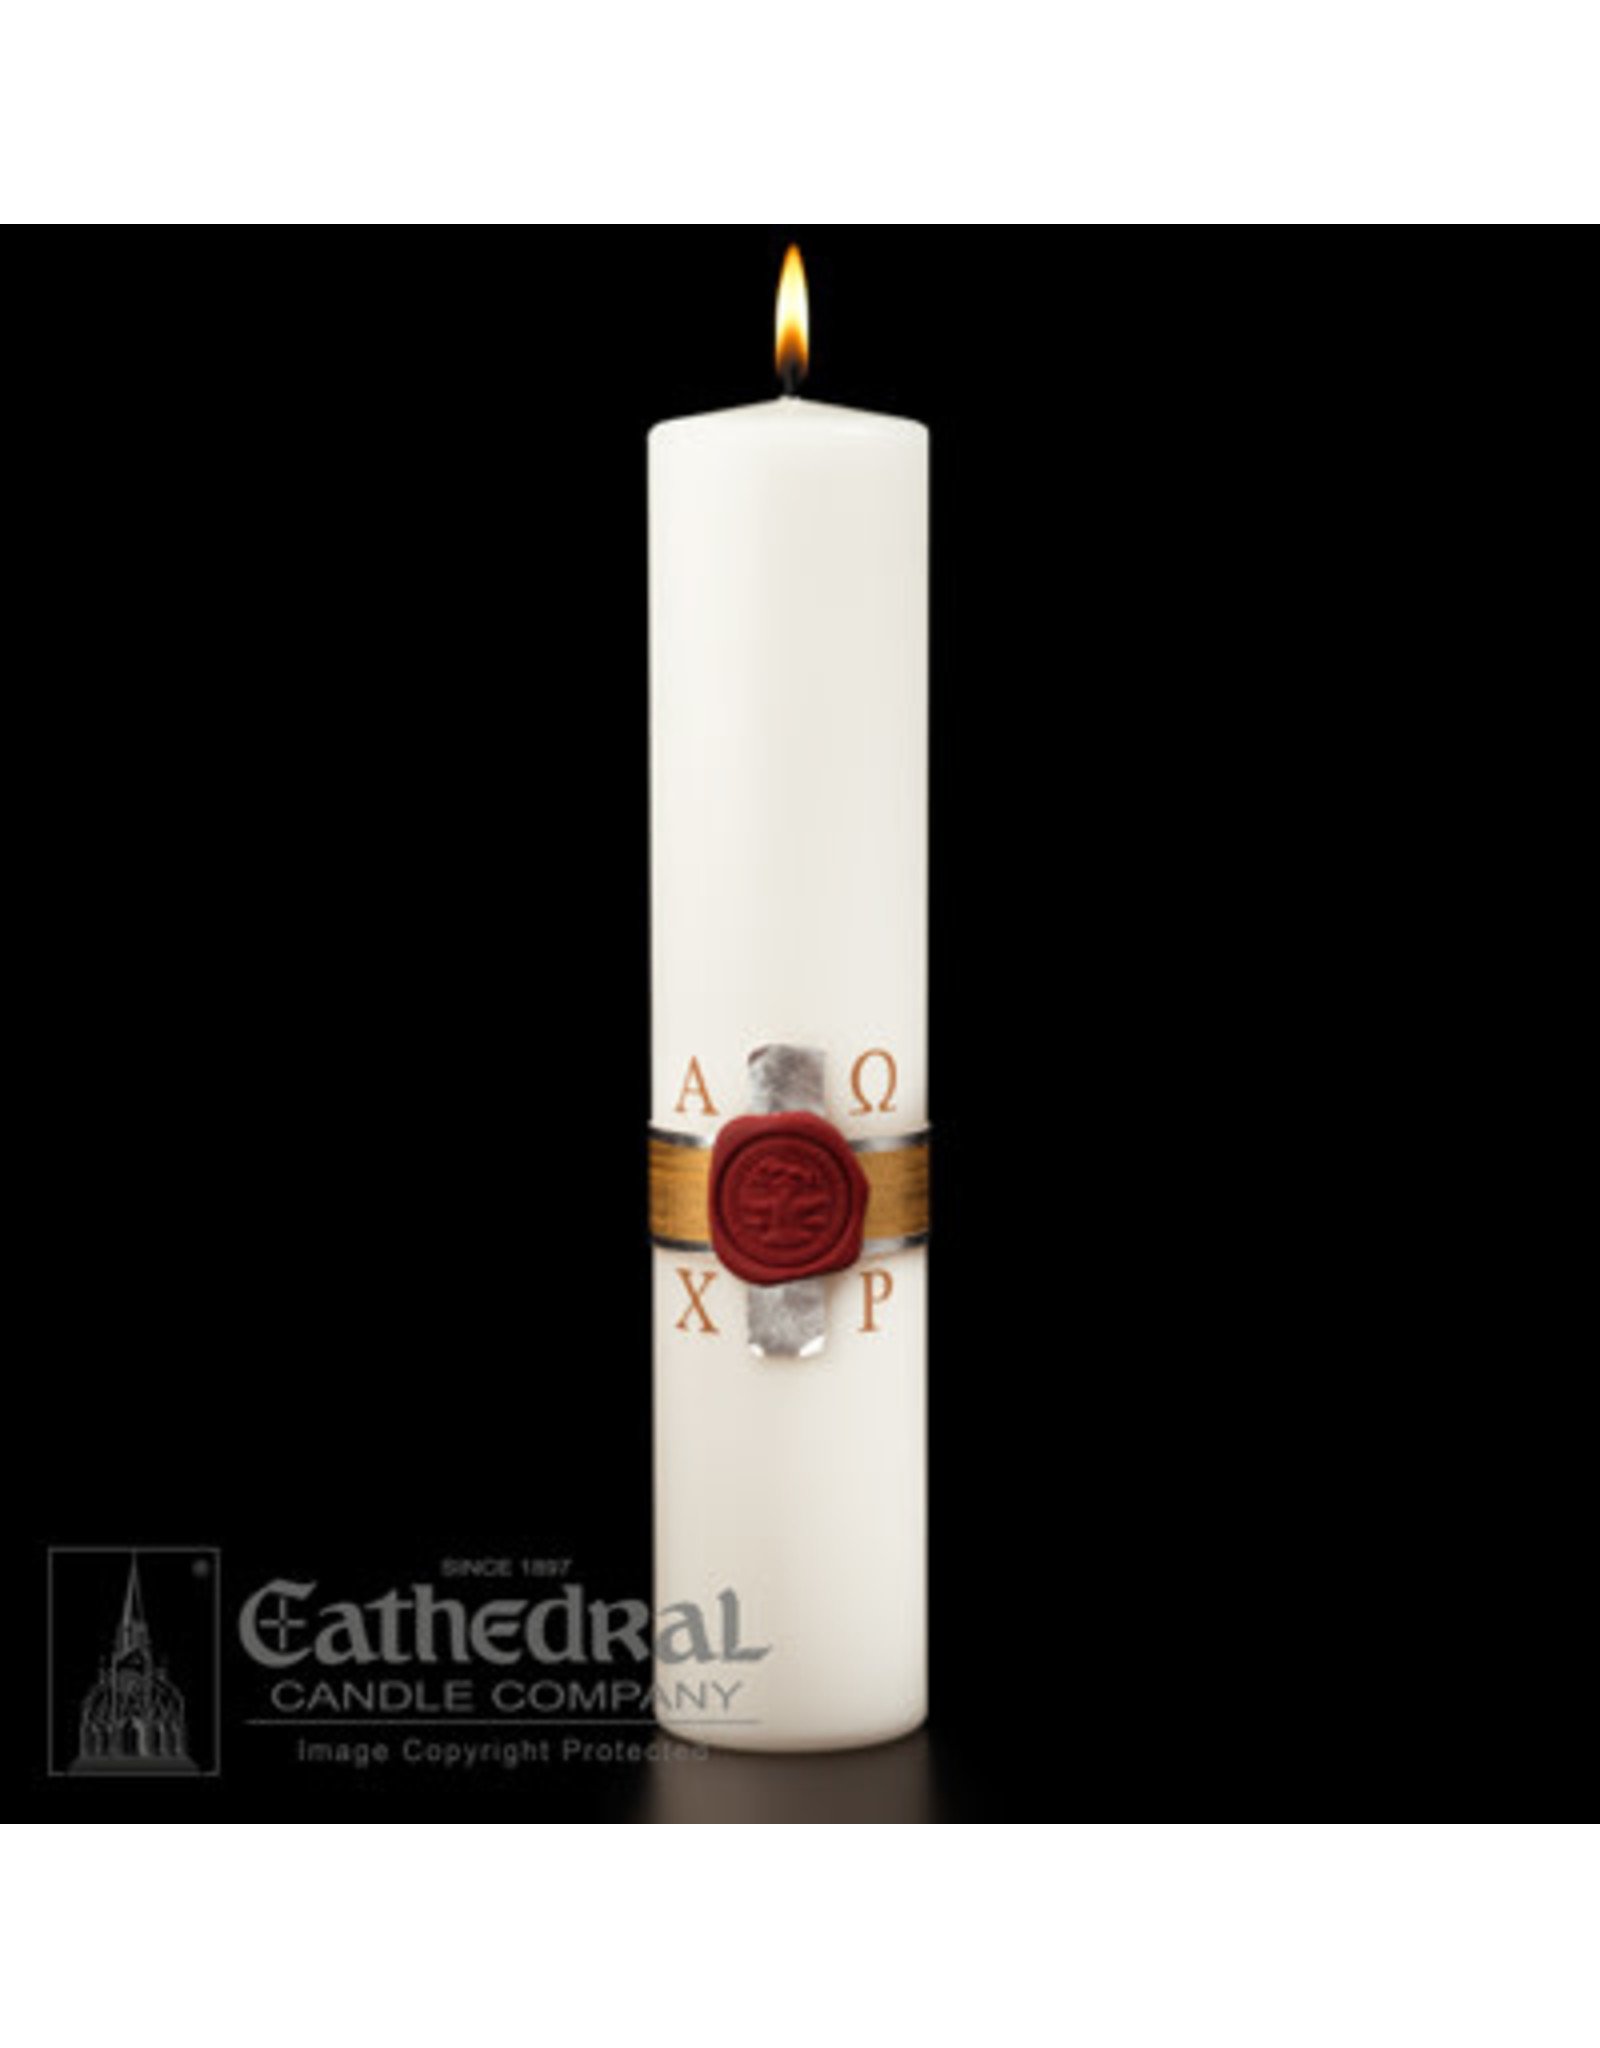 Cathedral Candle Christ Candle - Anno Domini - 3x14 - Sculptwax